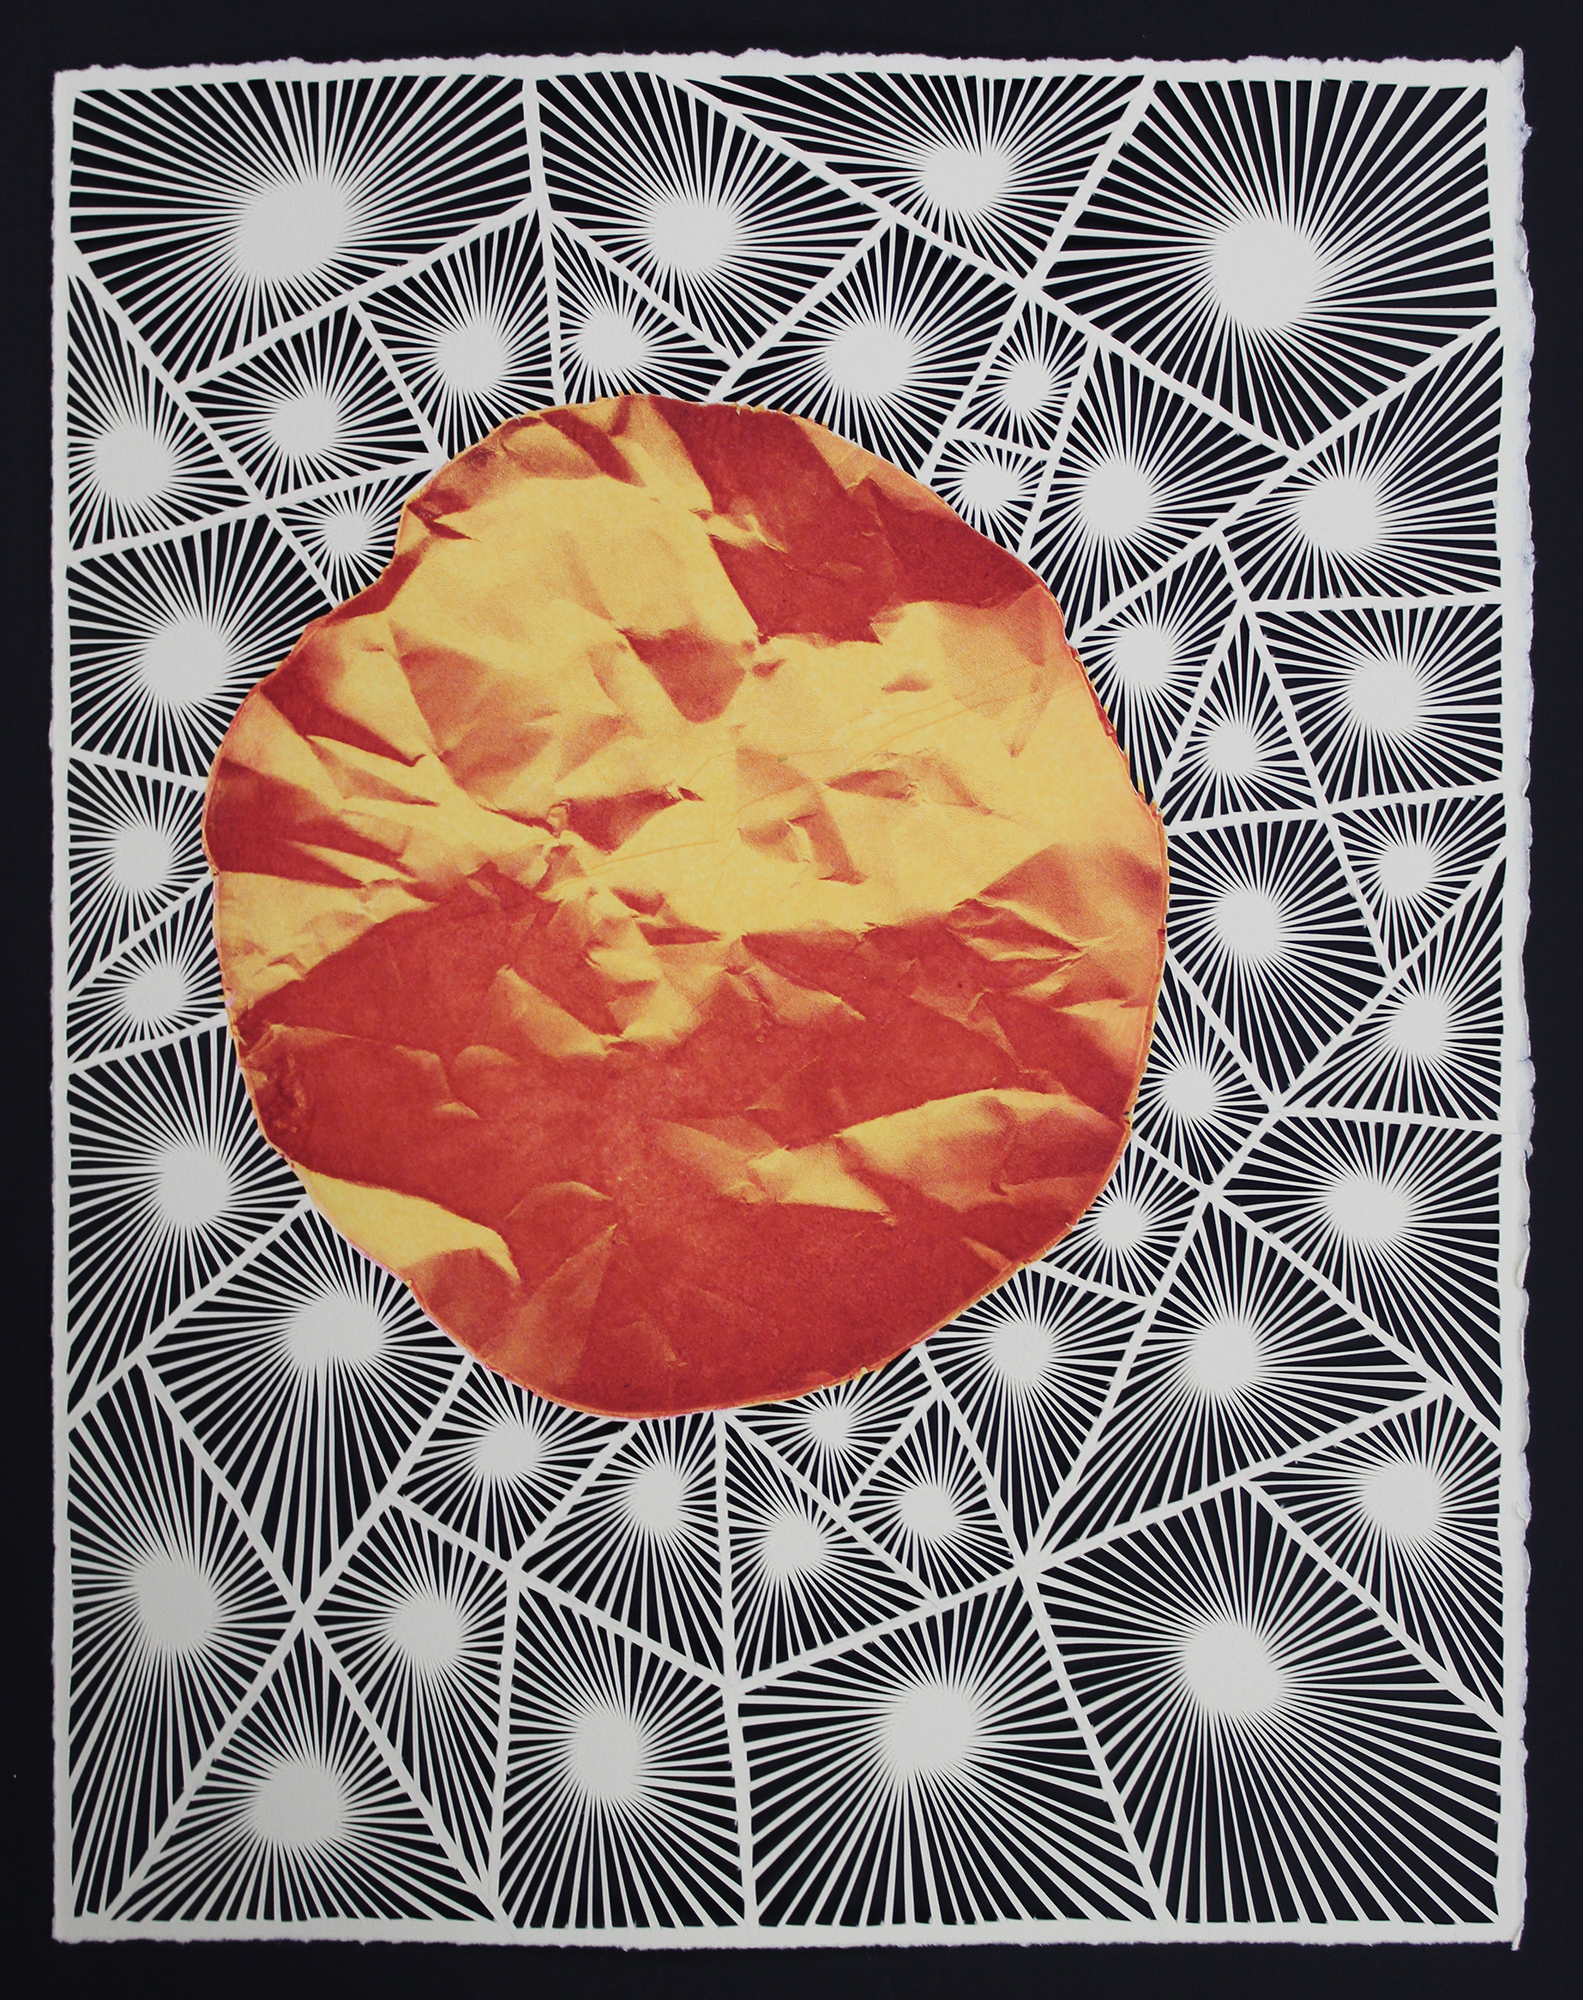  Red Giant  Laser intaglio etching w/ Chine Collé on white hand-cut paper  12” x 15” unframed 